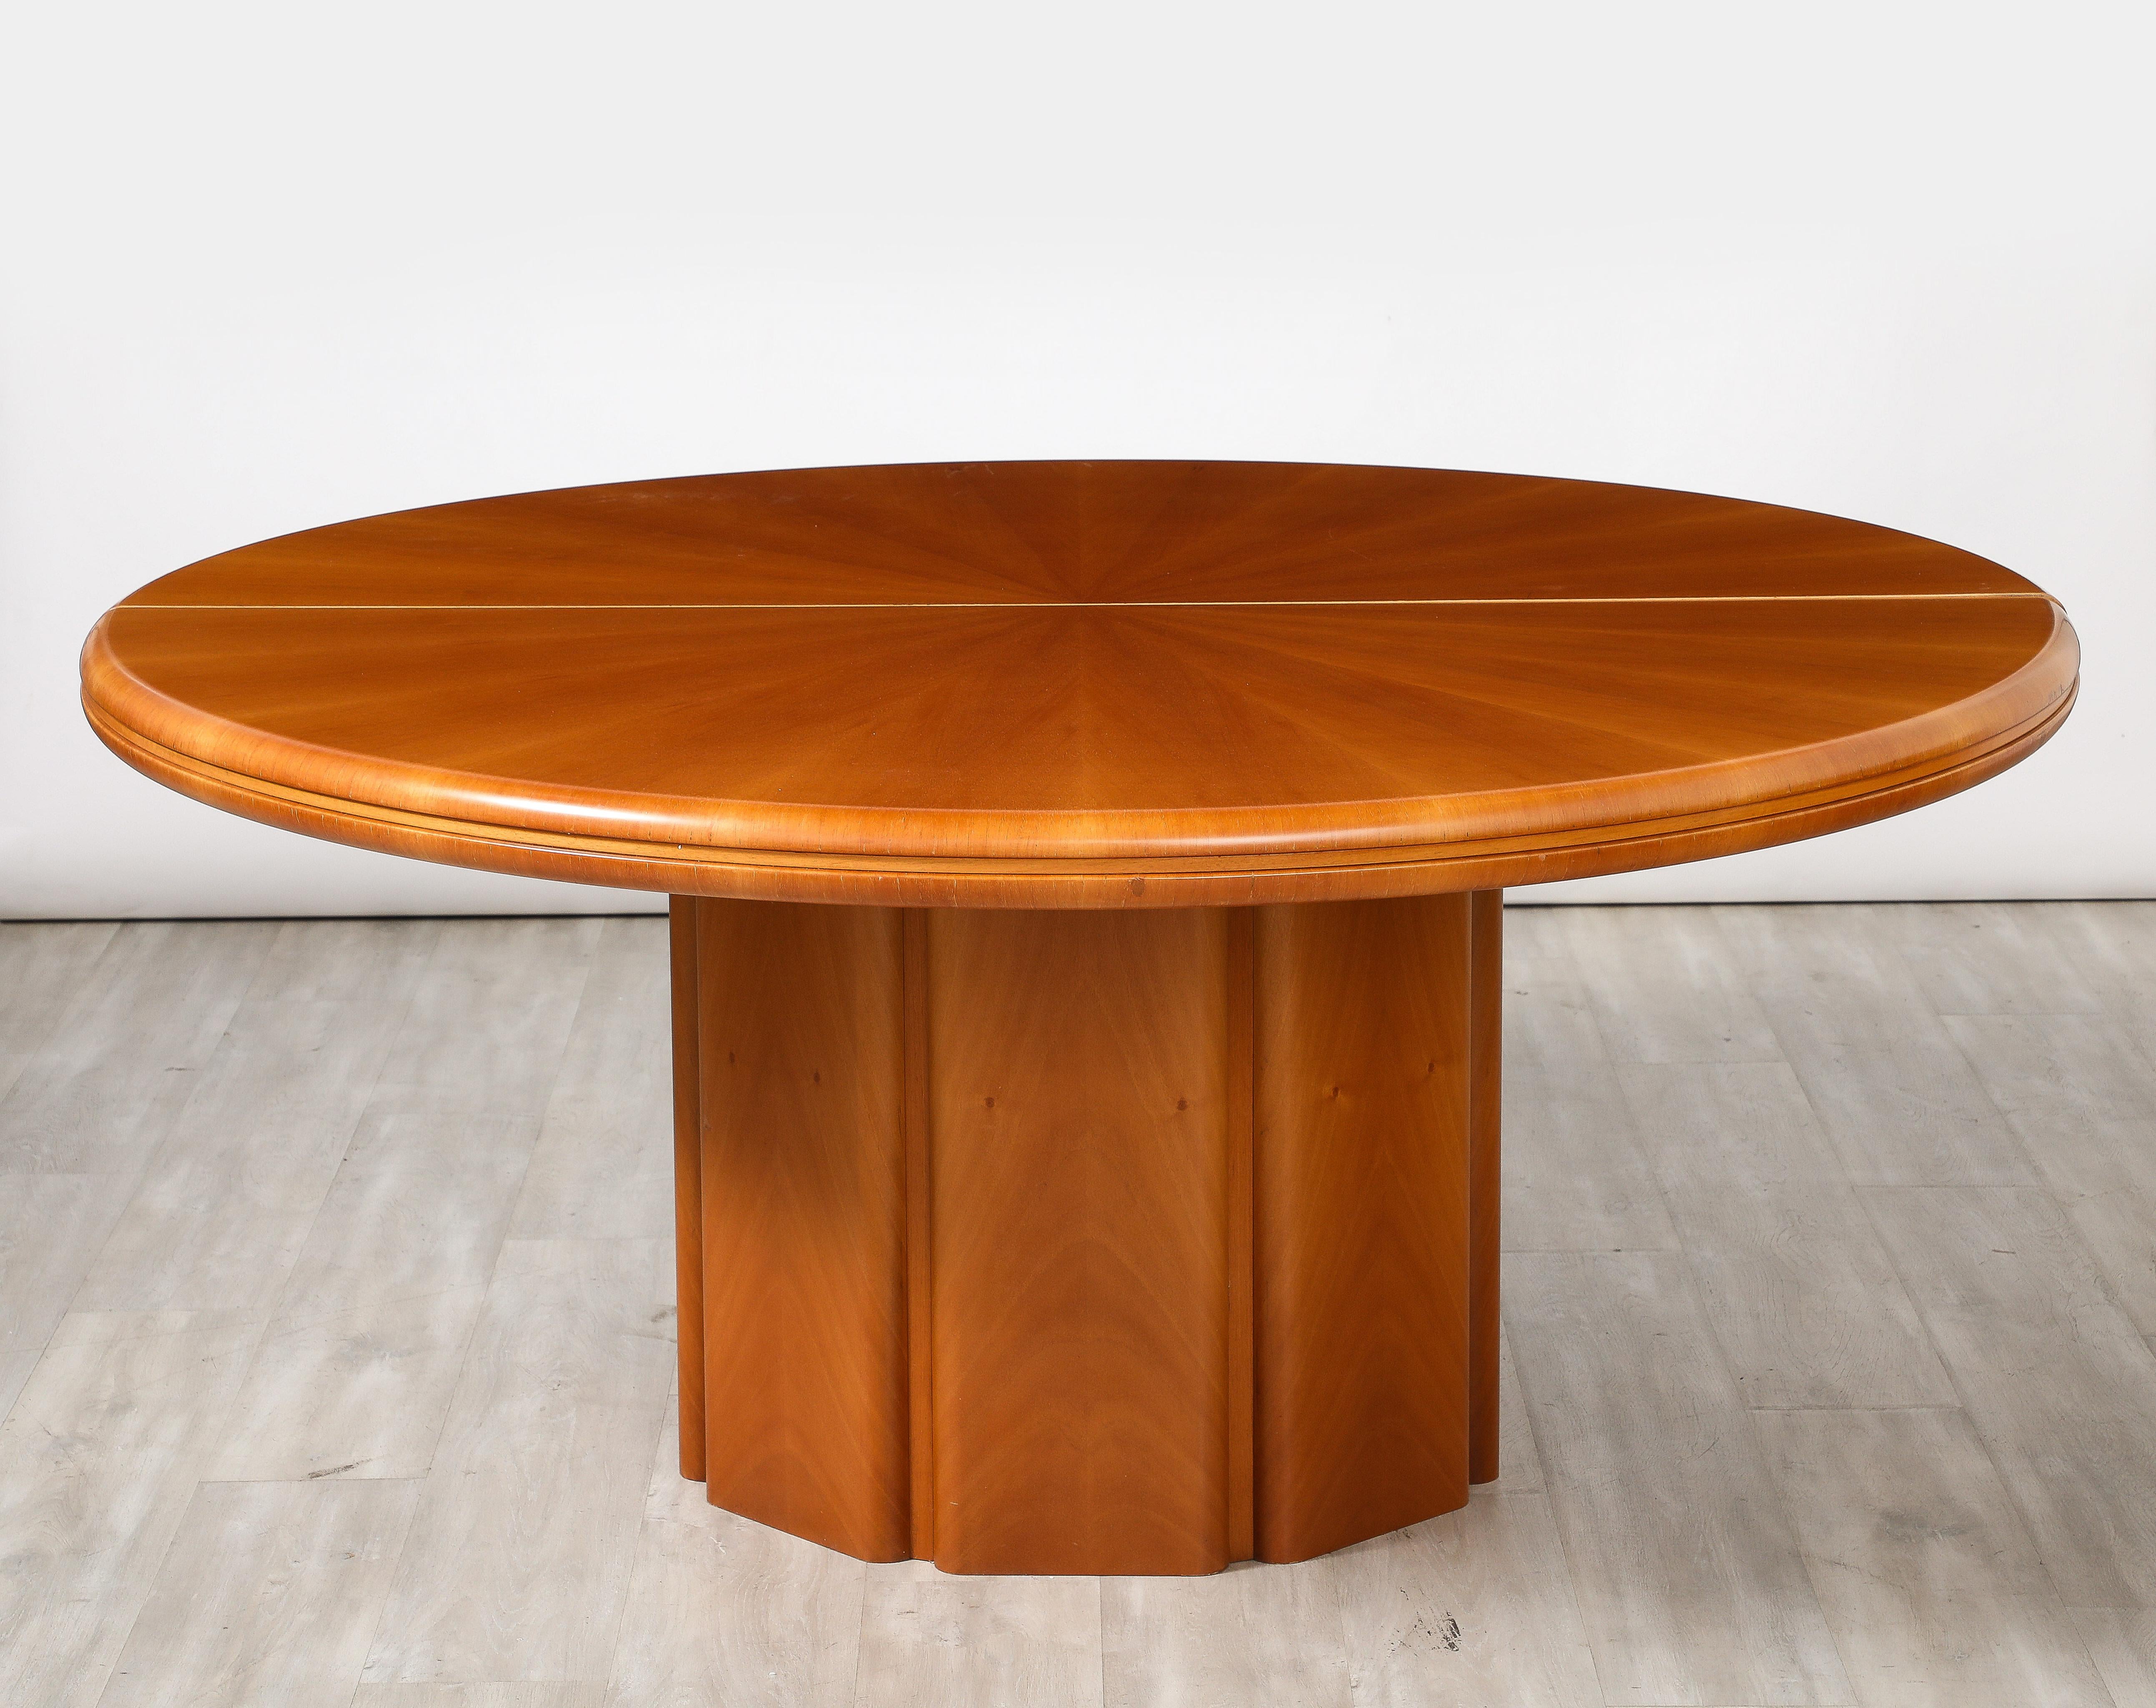 An Italian modernist dining or center pedestal table in maple wood.  The table top with a beautiful sunburst patter, the pedestal base is constructed with a faceted design.  Dramatic in size, it can be used as a center table or dining table. 
Italy,